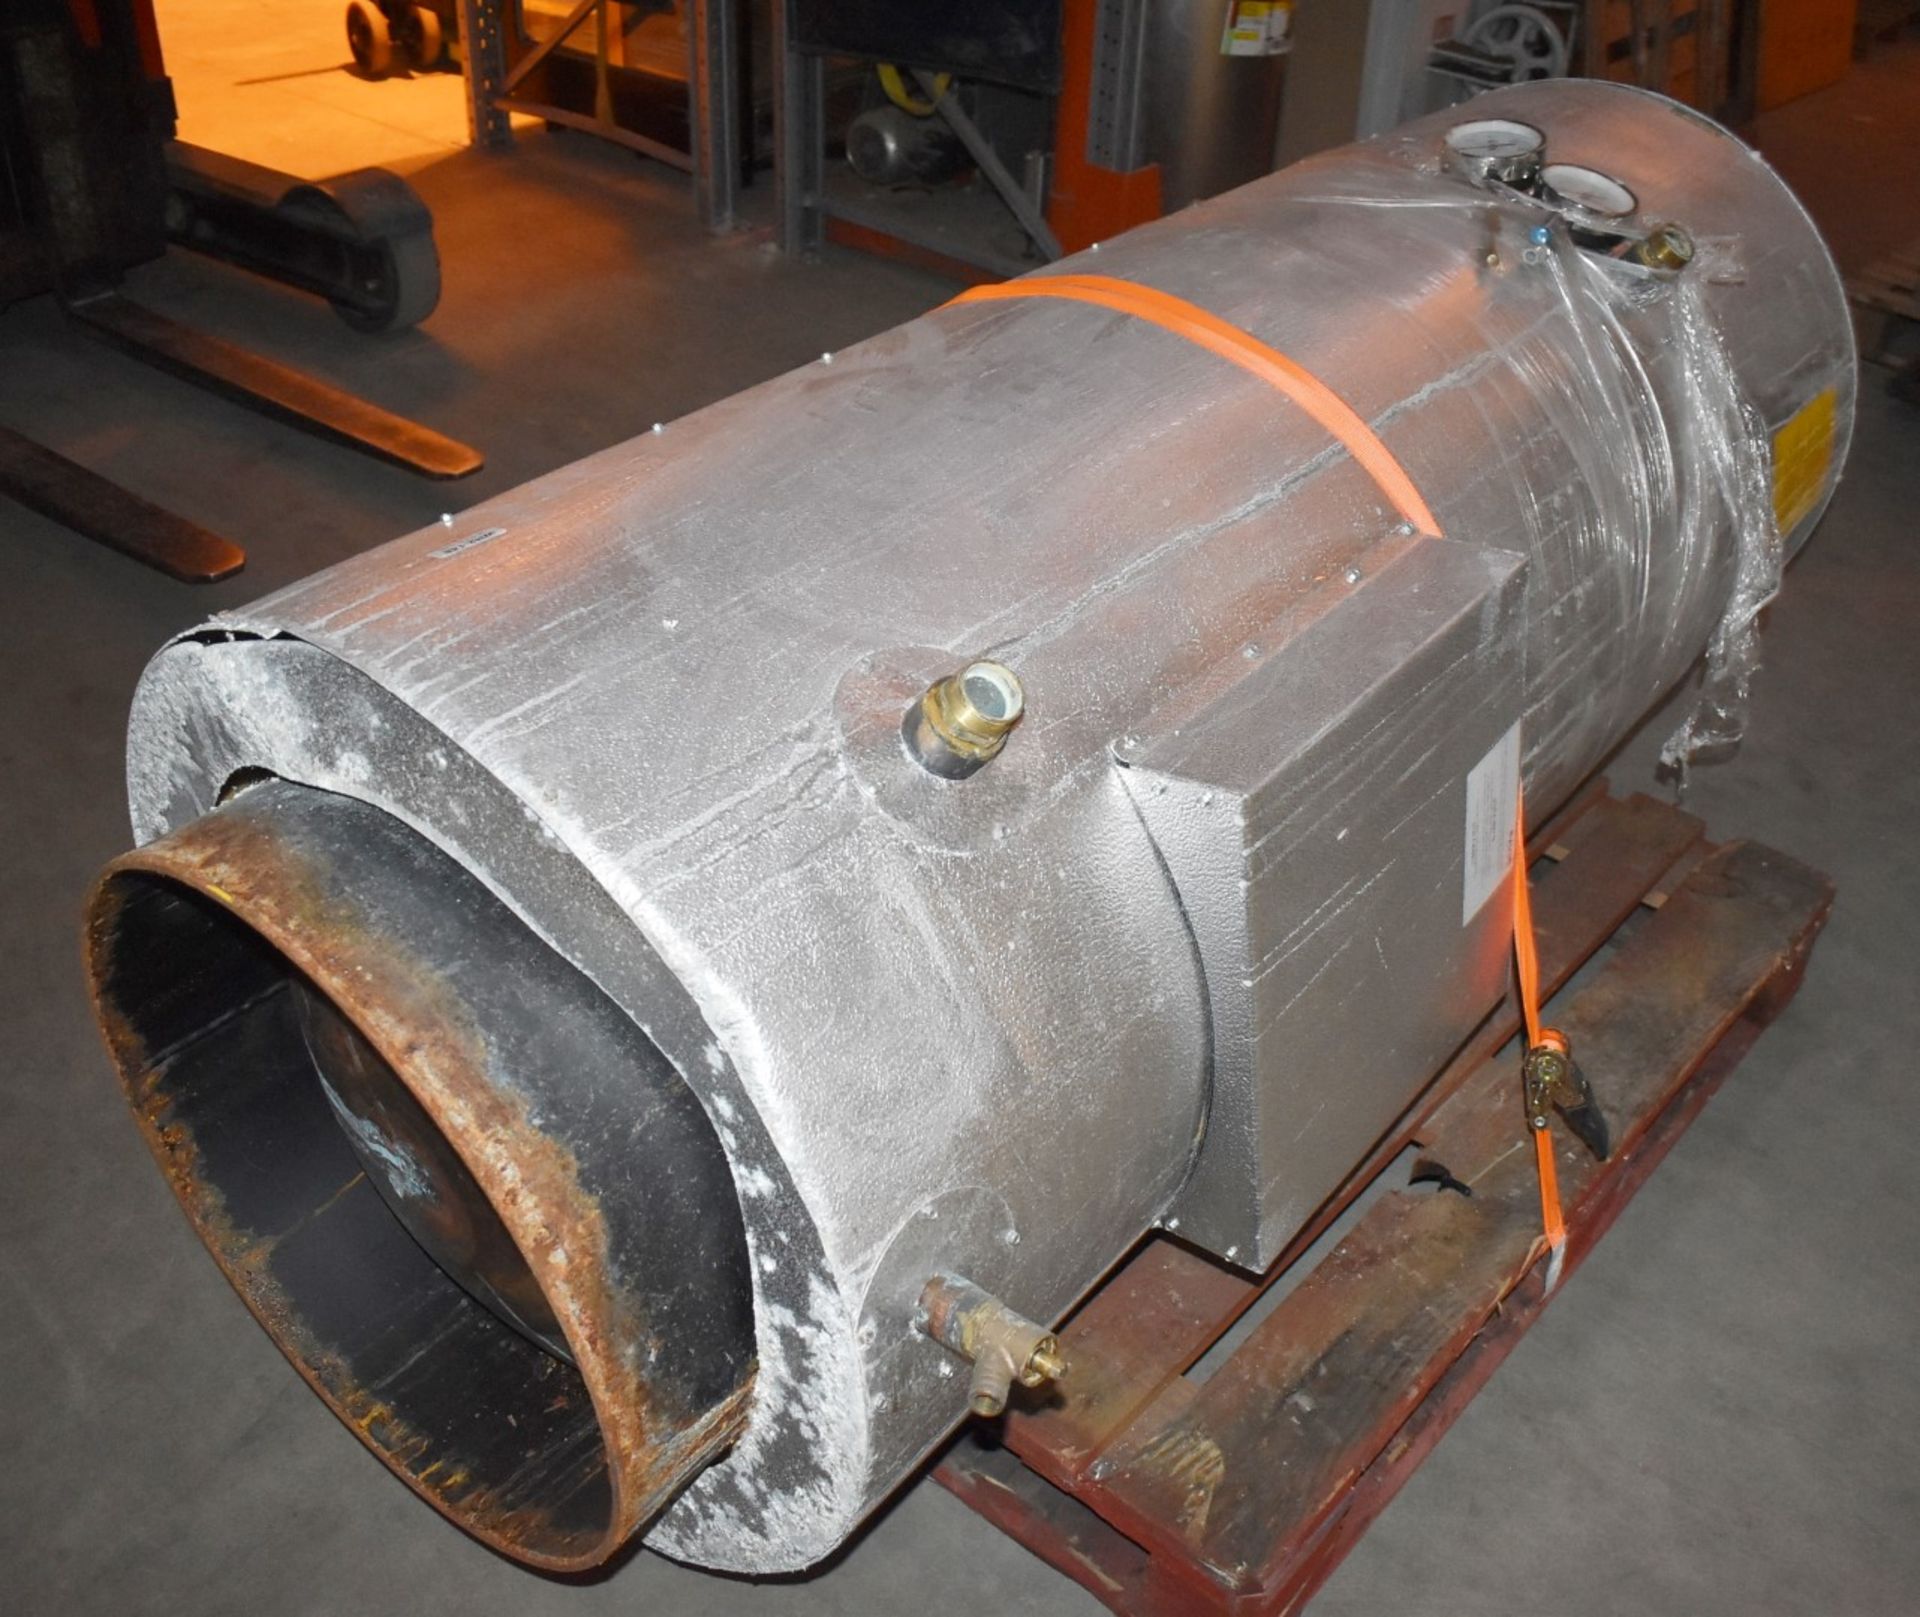 1 x Ryco SA 600 Tank - More Information to Follow - Ref: WH2-148B C6 - CL711 - Dimensions: Height - Image 3 of 14